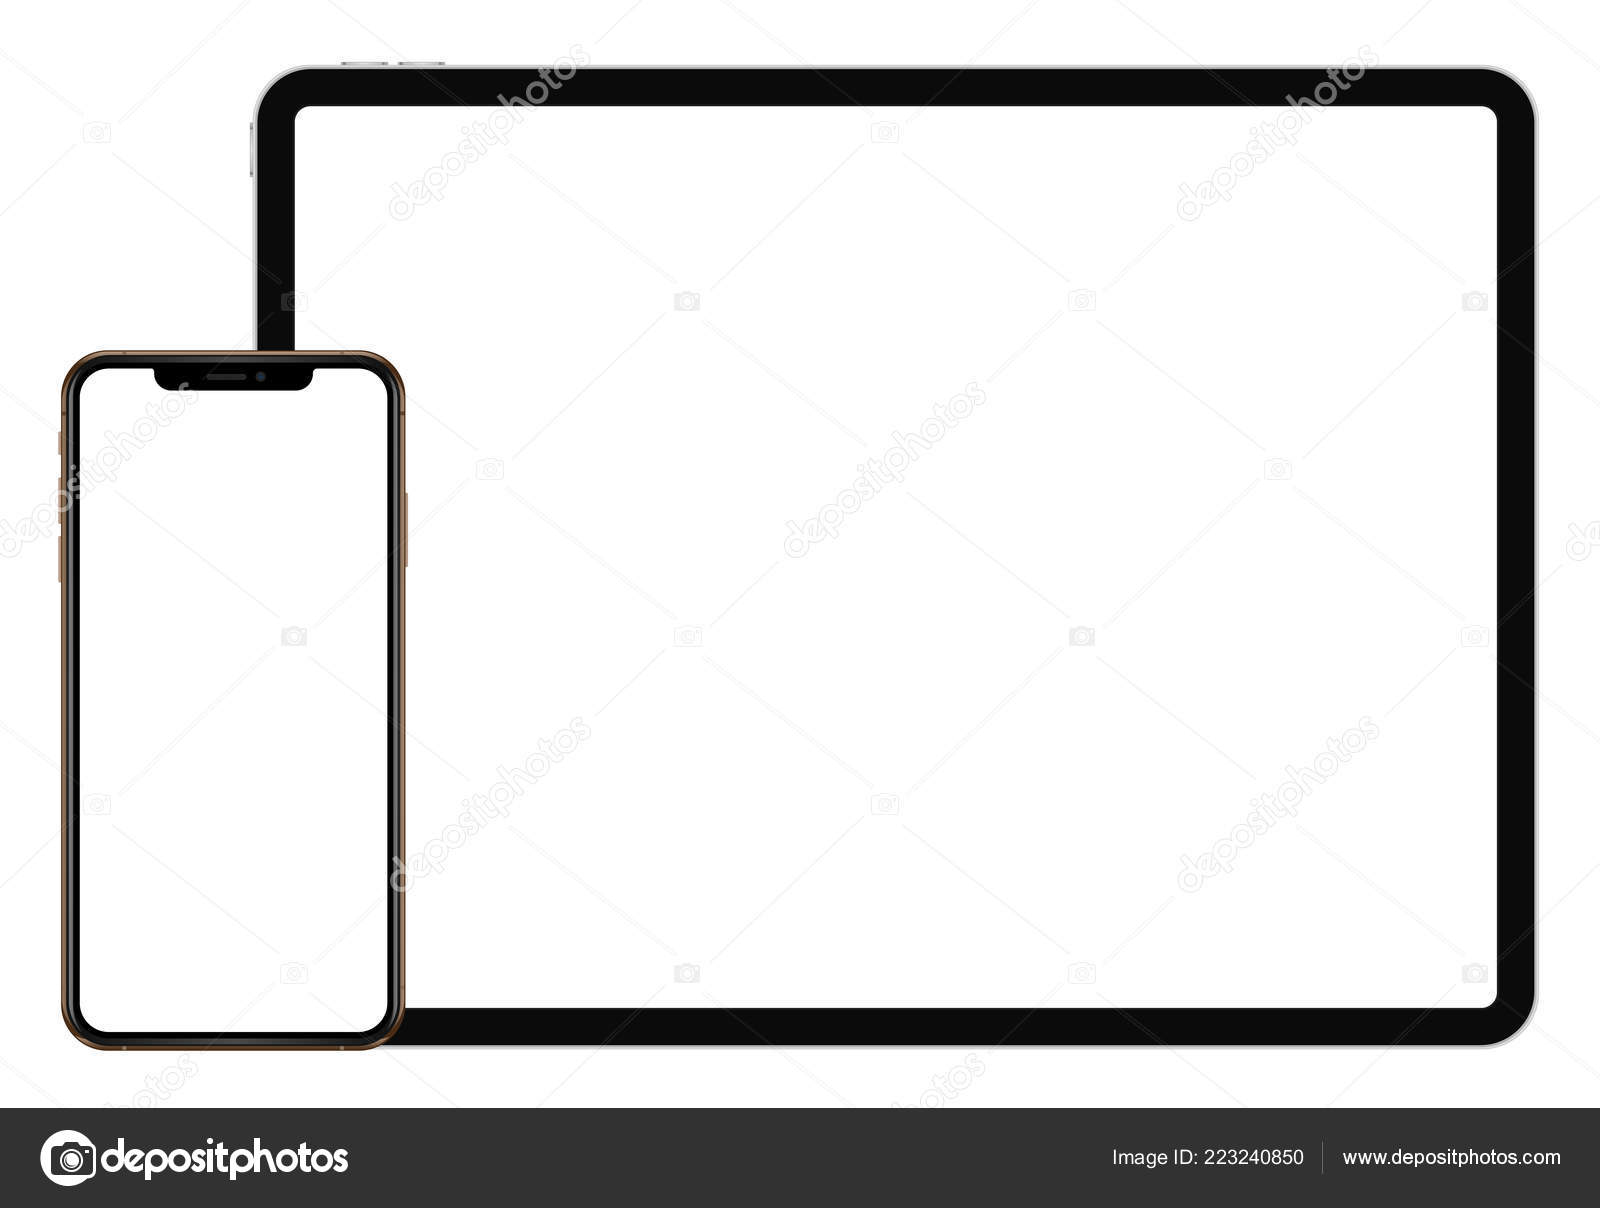 Business Tablet Ipad Pro Iphone Max White Background Vector Eps Vector Image By C Leonardo255 Vector Stock